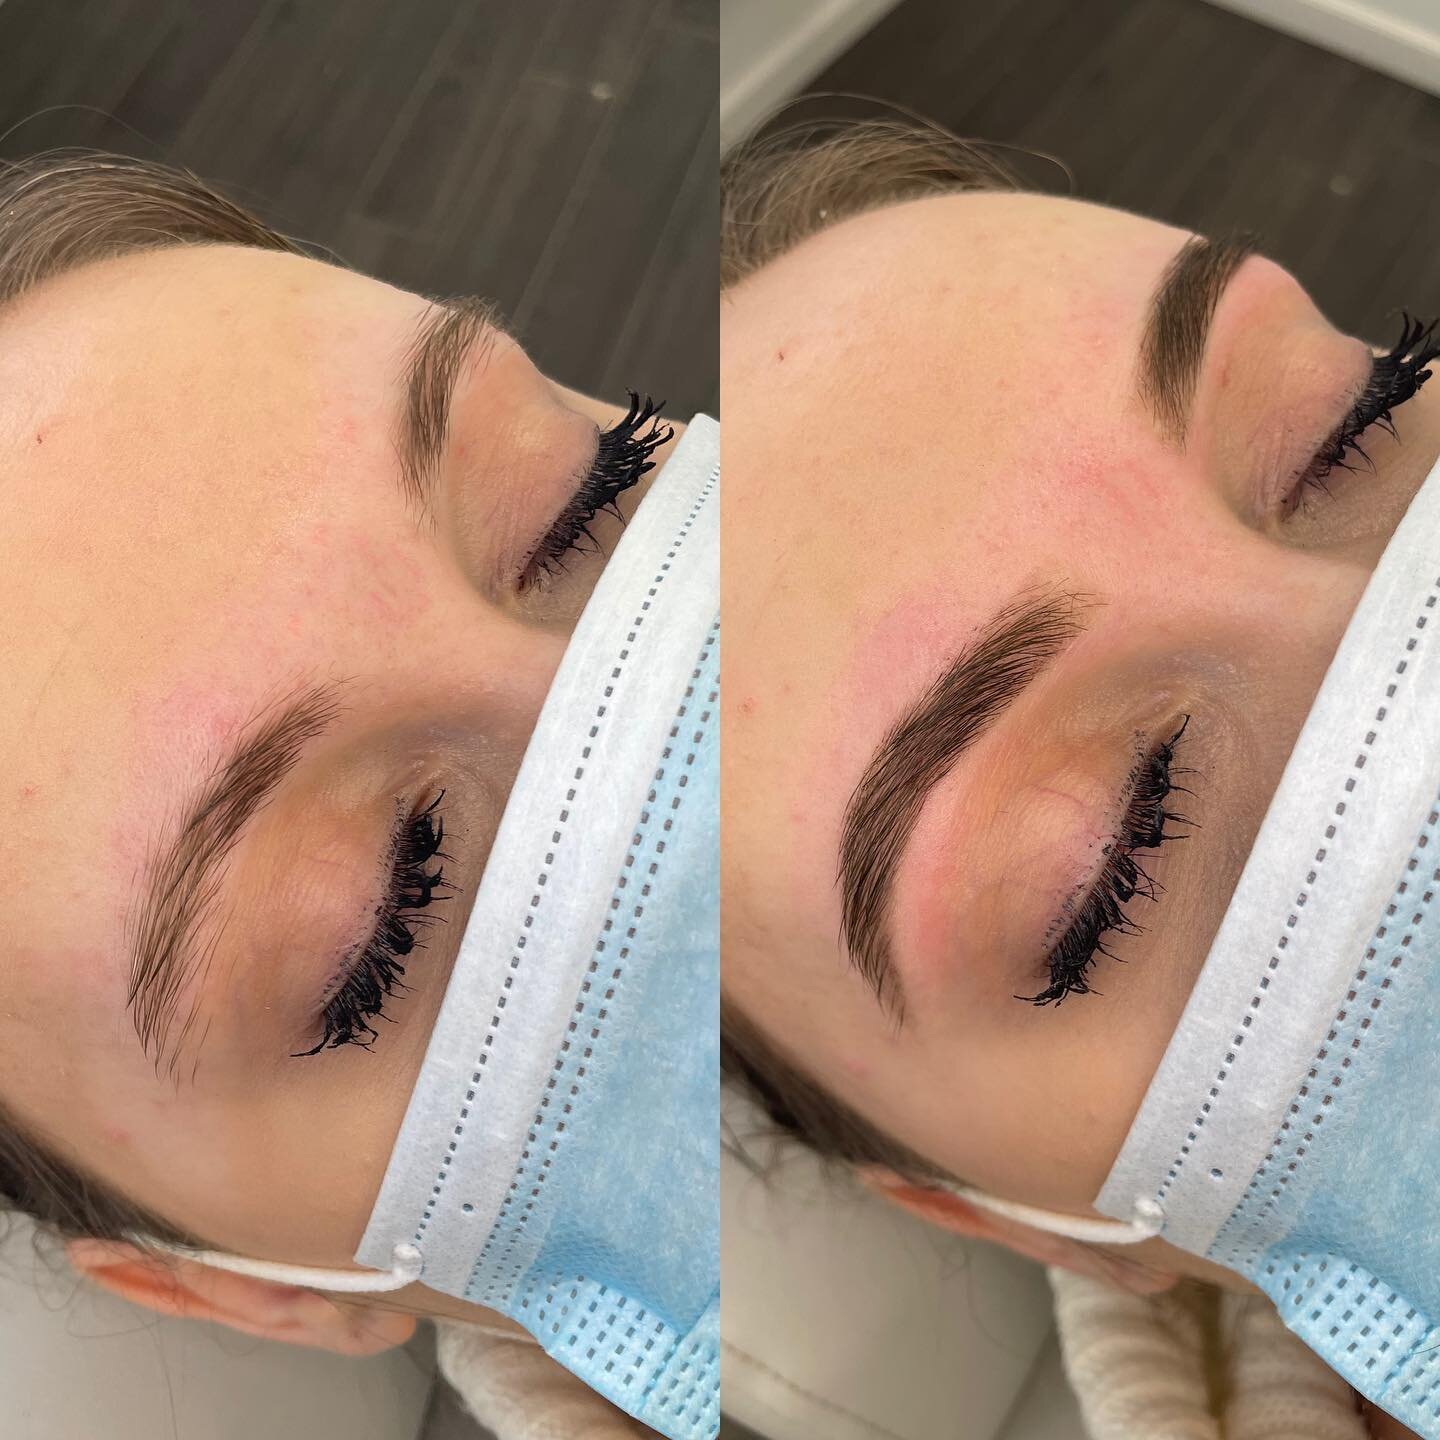 Brow wax &amp; tint 🦋
✨New clients receive $20 off first lash set|$10 off lift &amp; tint|$5 off brow wax &amp; tint✨
.
.
Call (732) 970-4390 to book 
Or visit our website to book anytime! (Link in bio) 
.
.
#volume #volumelashes #hybridlashes #lash